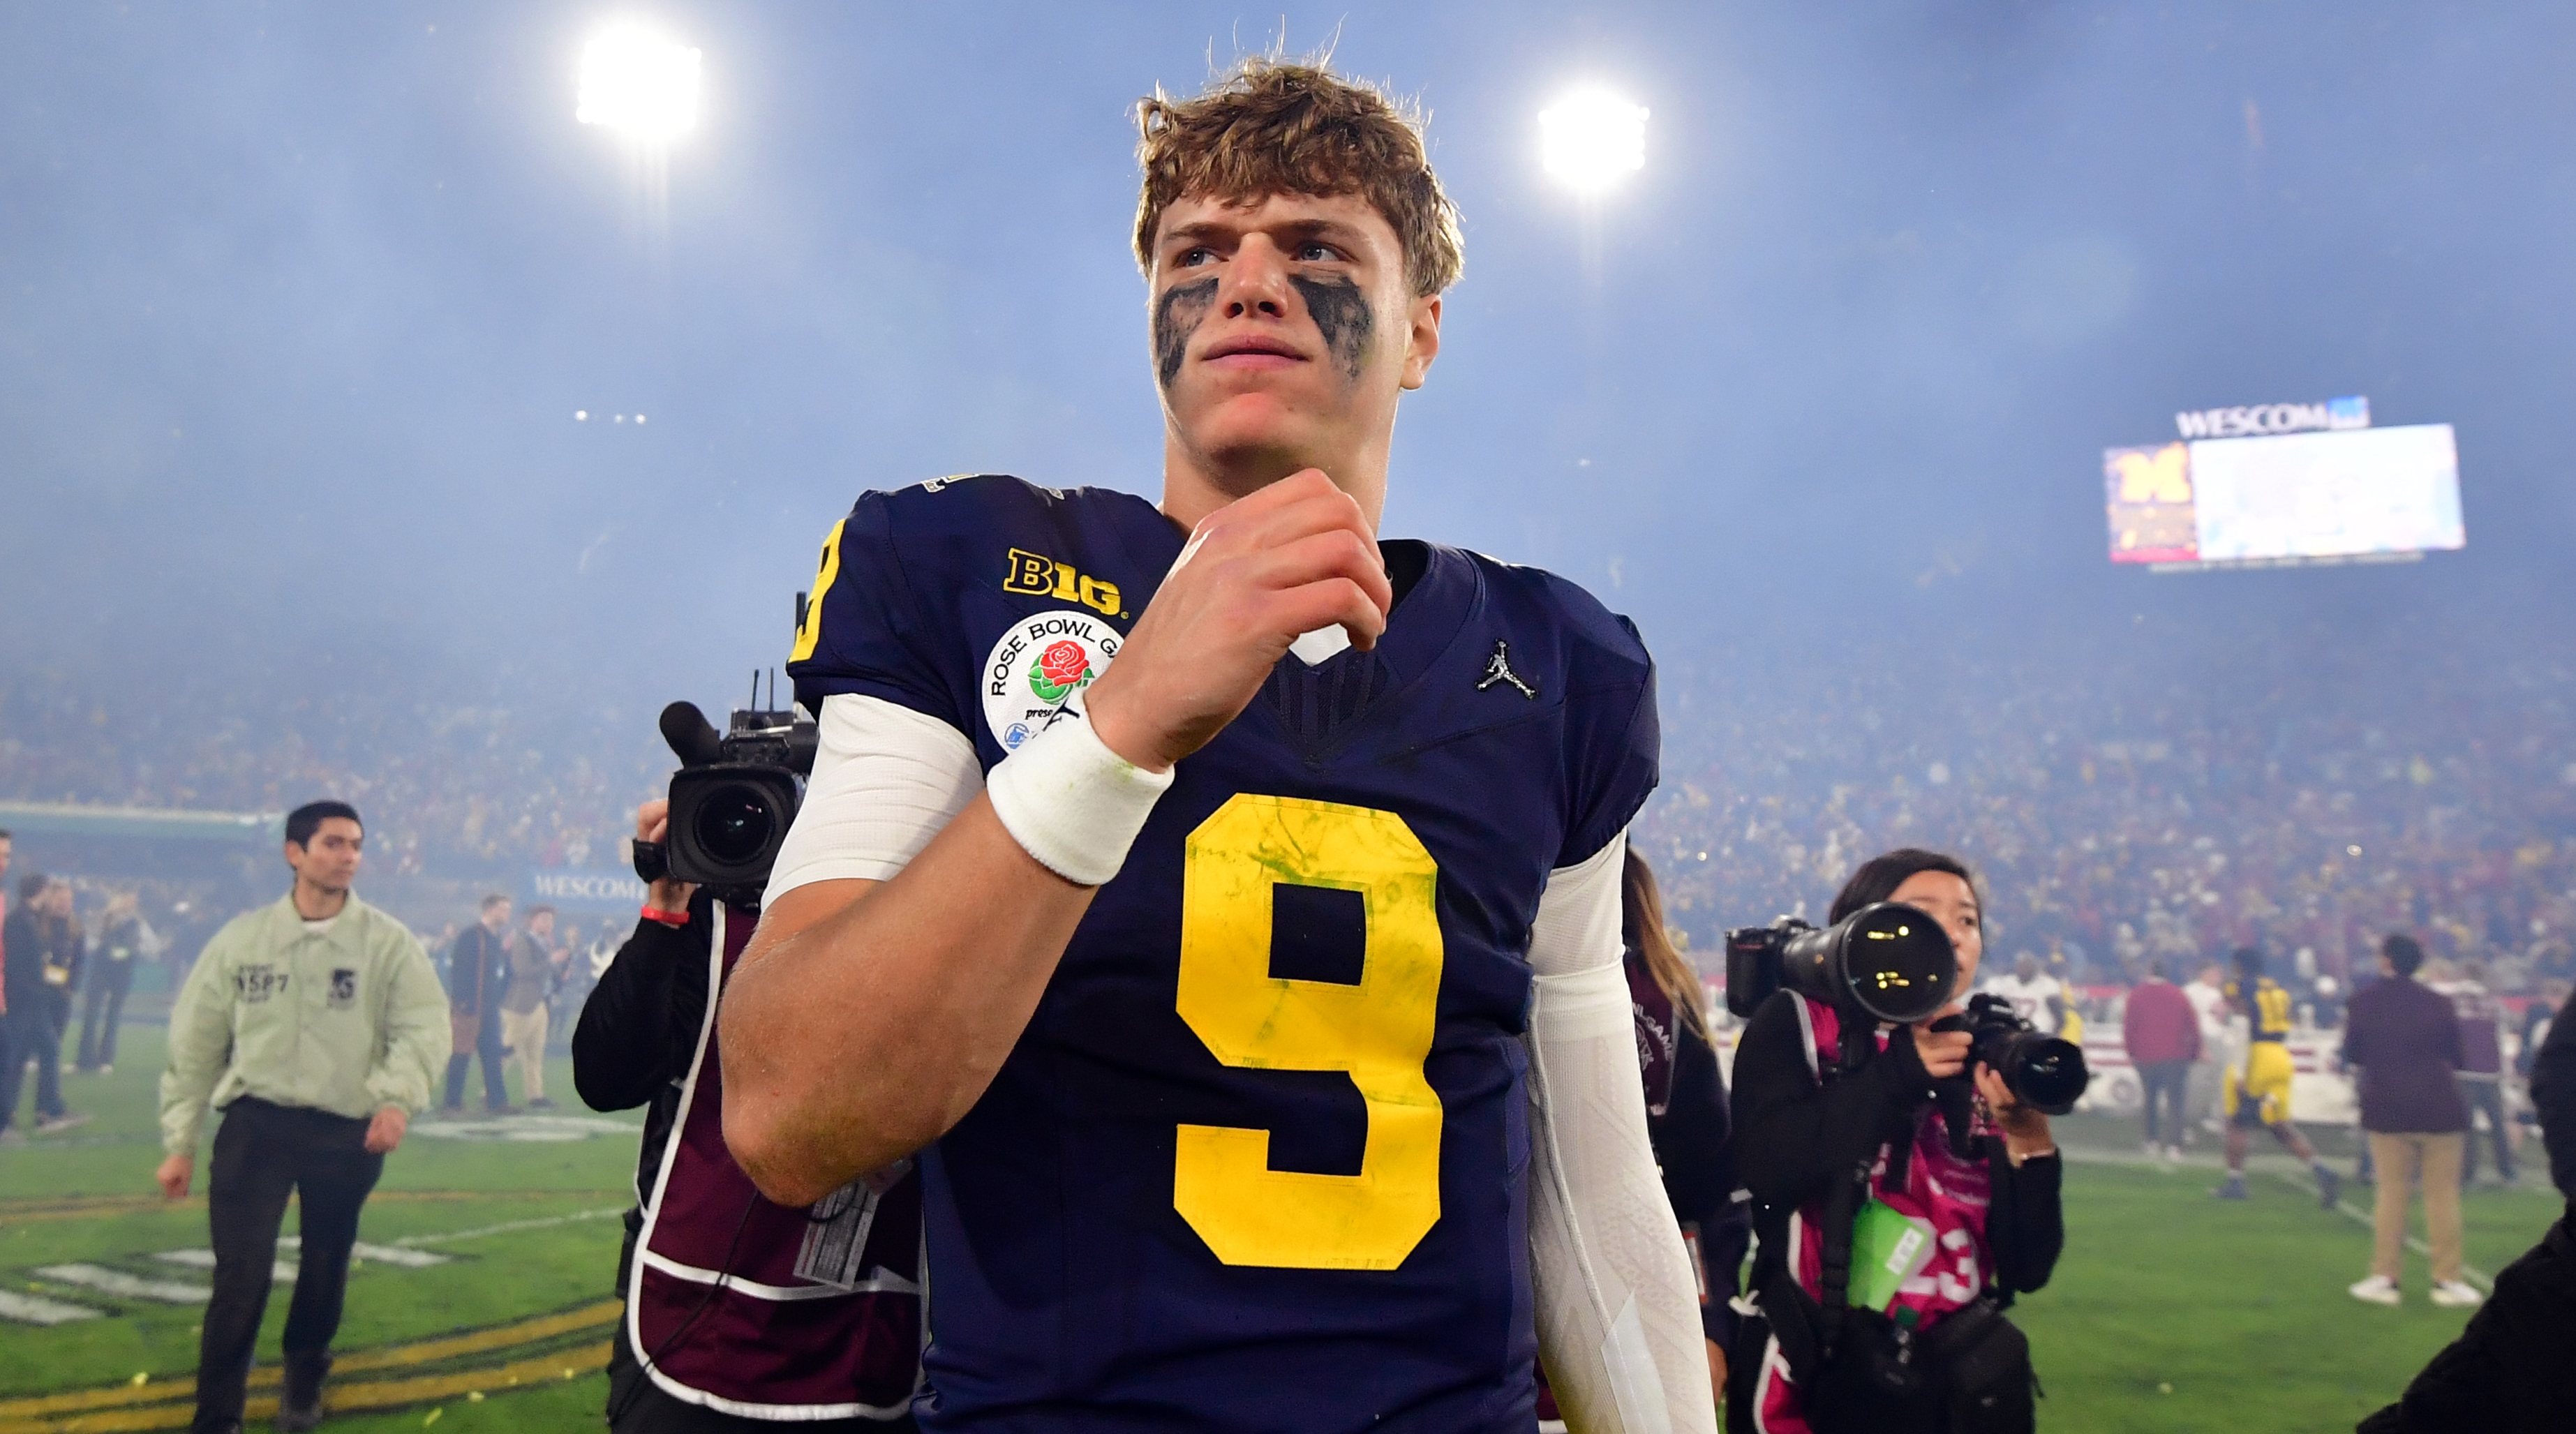 Michigan Wolverines quarterback J.J. McCarthy (9) walks off field after defeating the Alabama Crimson Tide in the Rose Bowl.